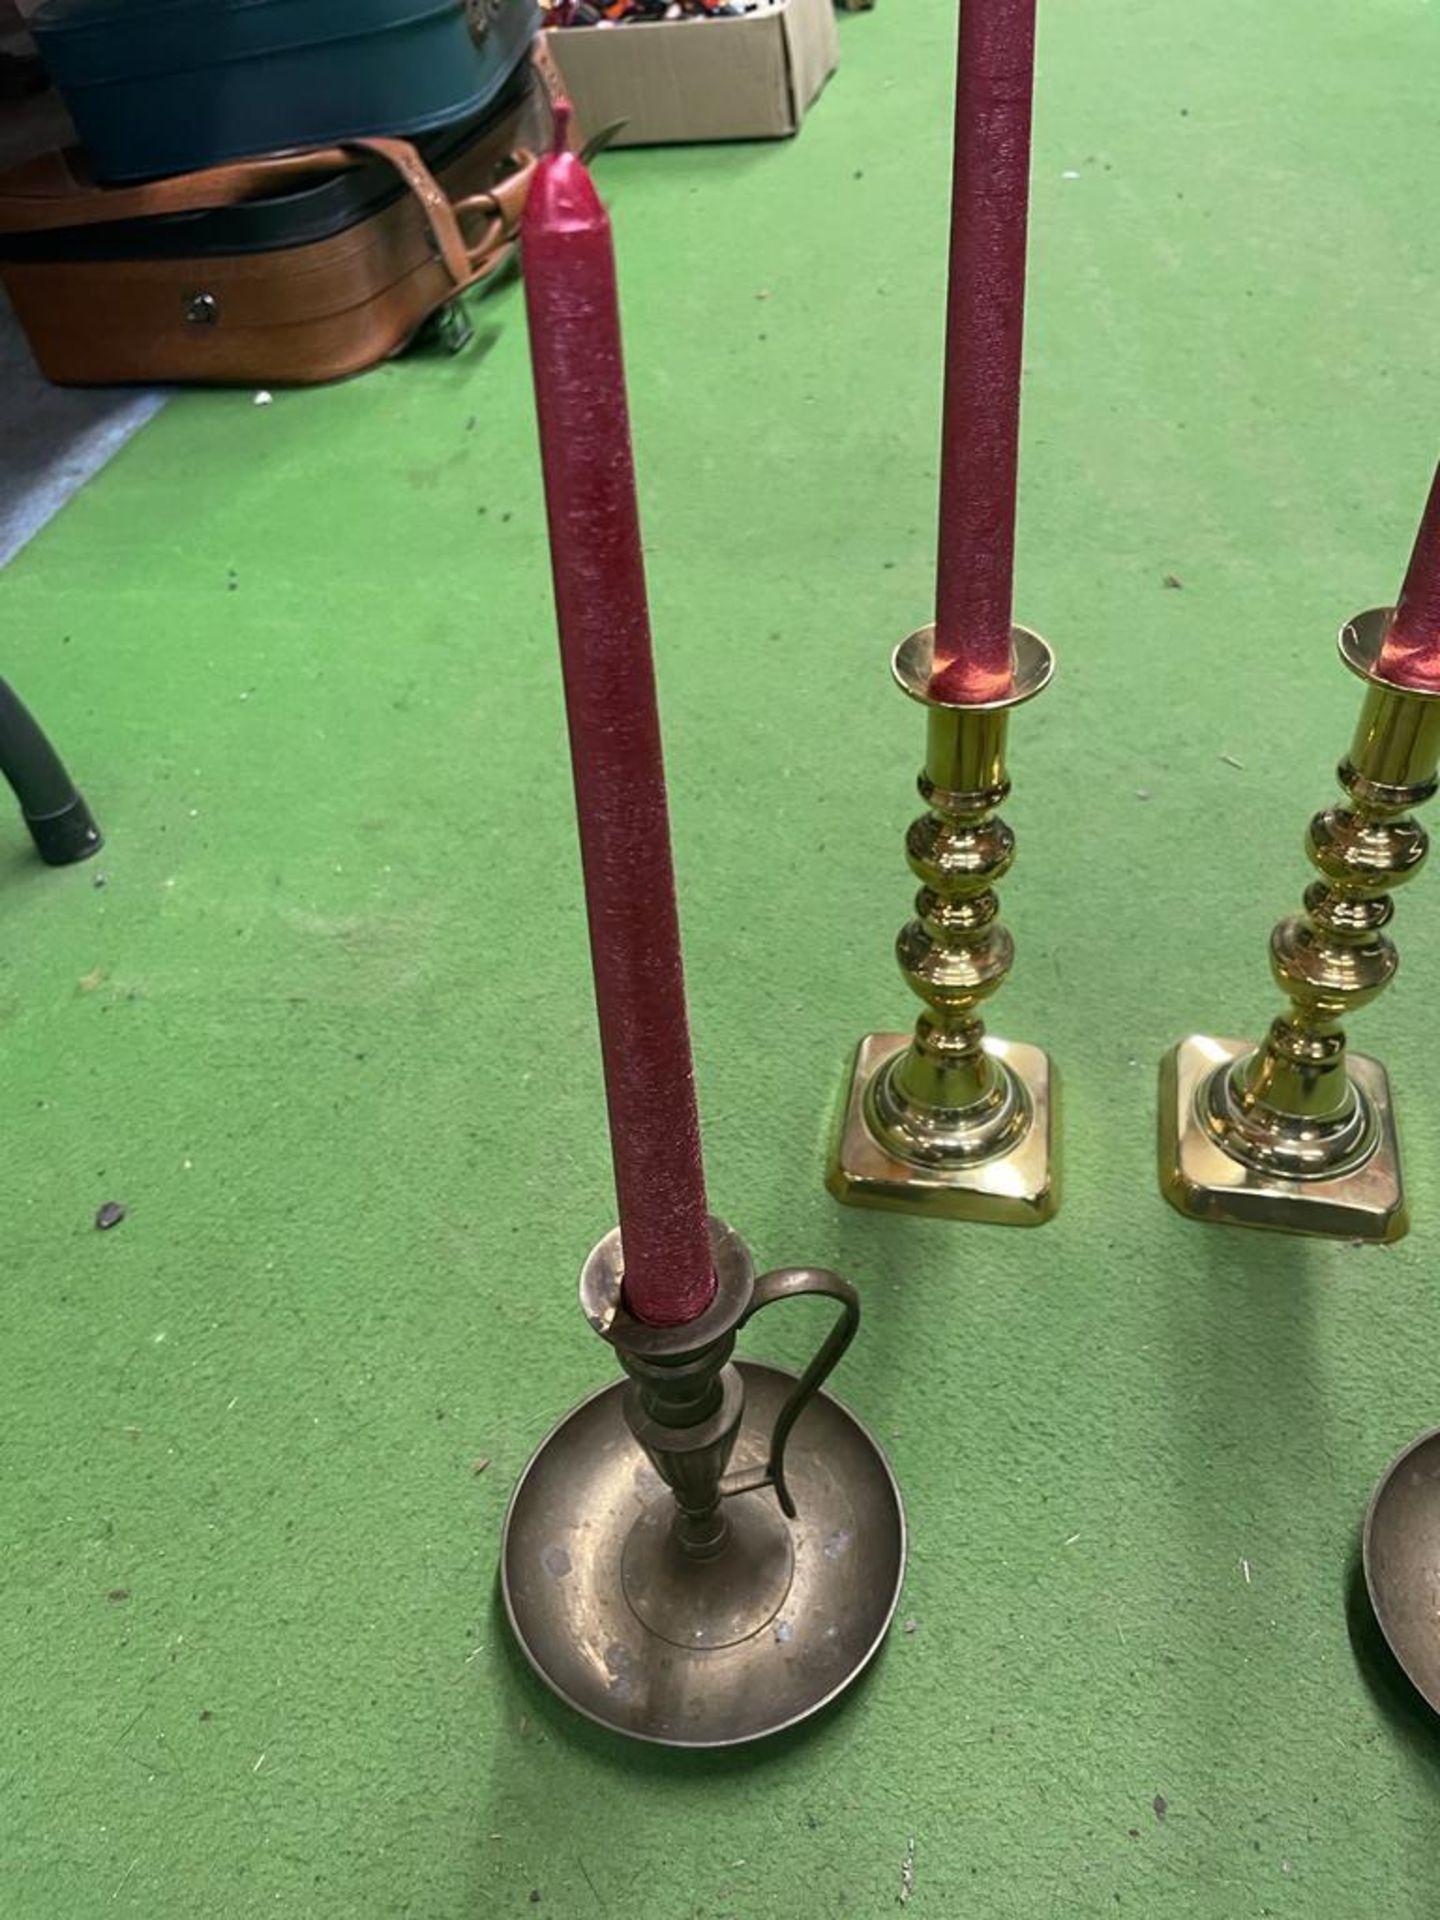 TWO PAIRS OF VINTAGE BRASS CANDLESTICKS WITH CANDLES - Image 2 of 5